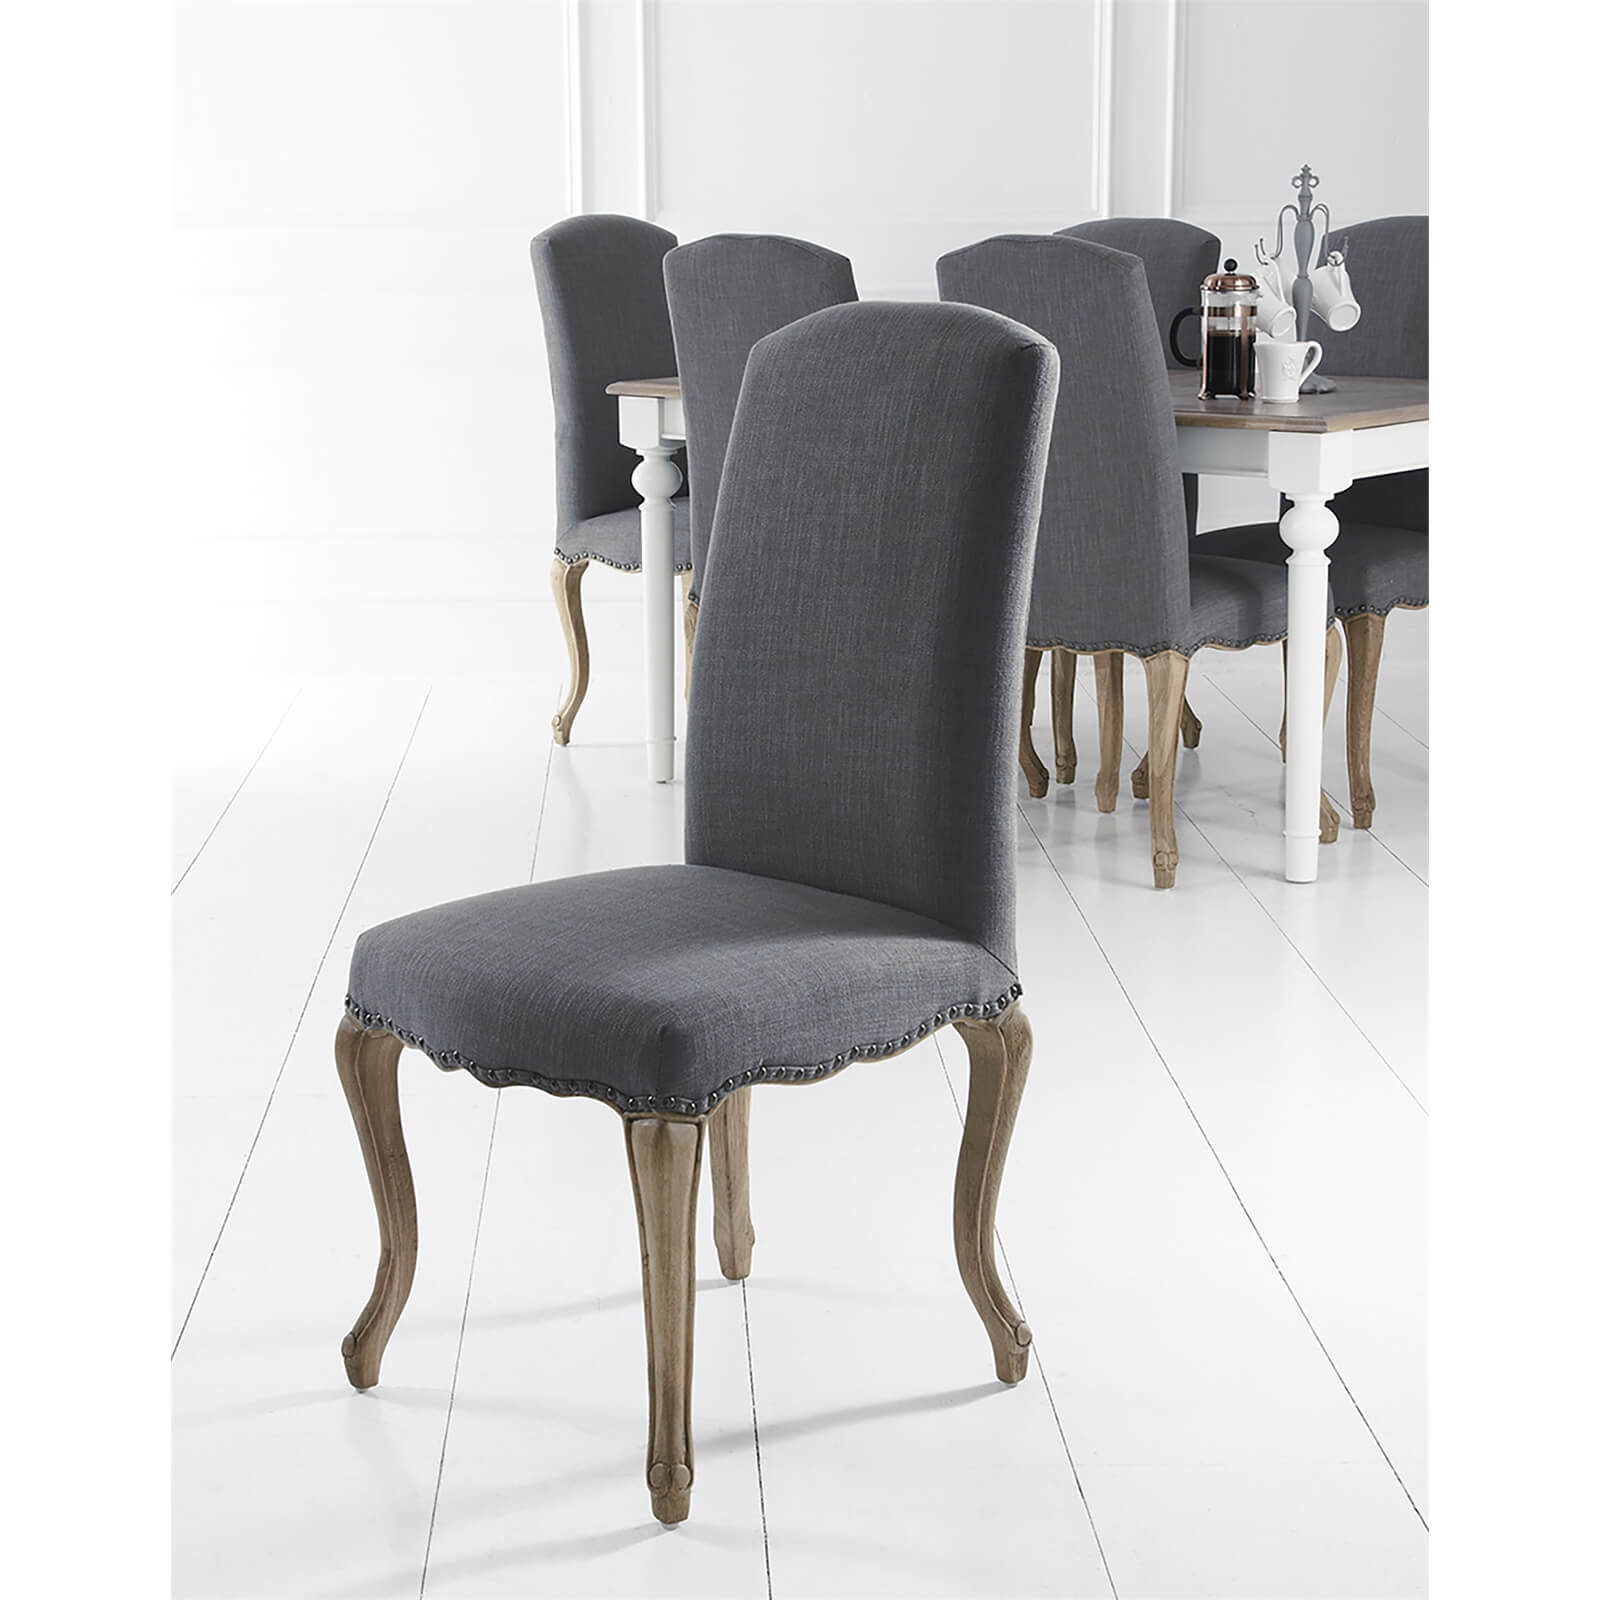 Studded Dining Chair - Set of 2 - Grey